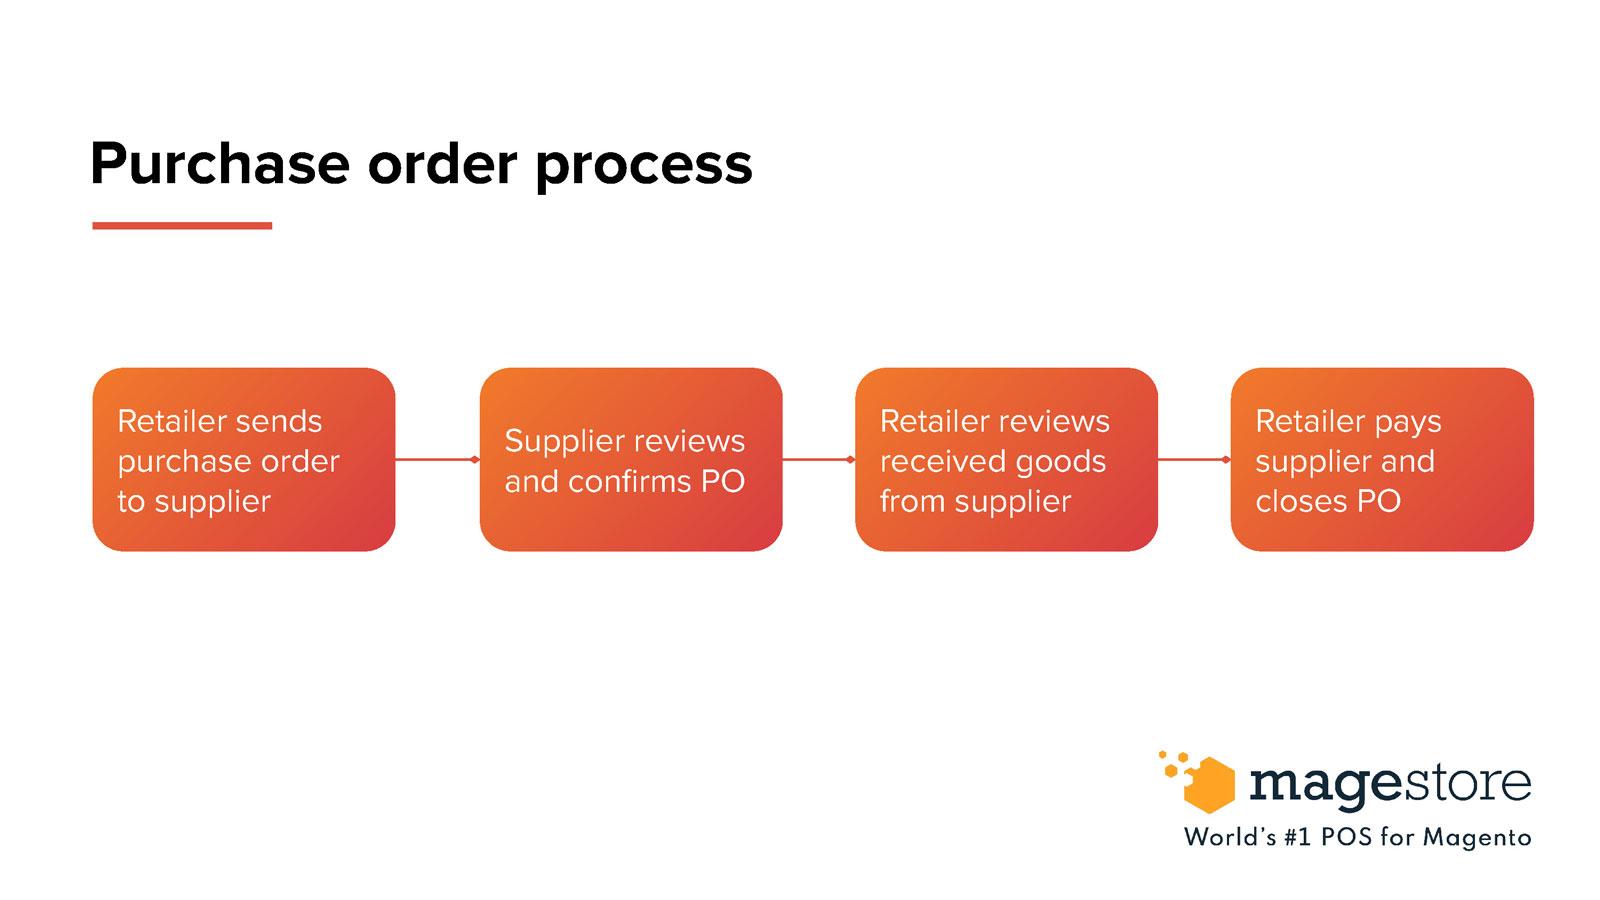 The purchase order process includes 4 key steps